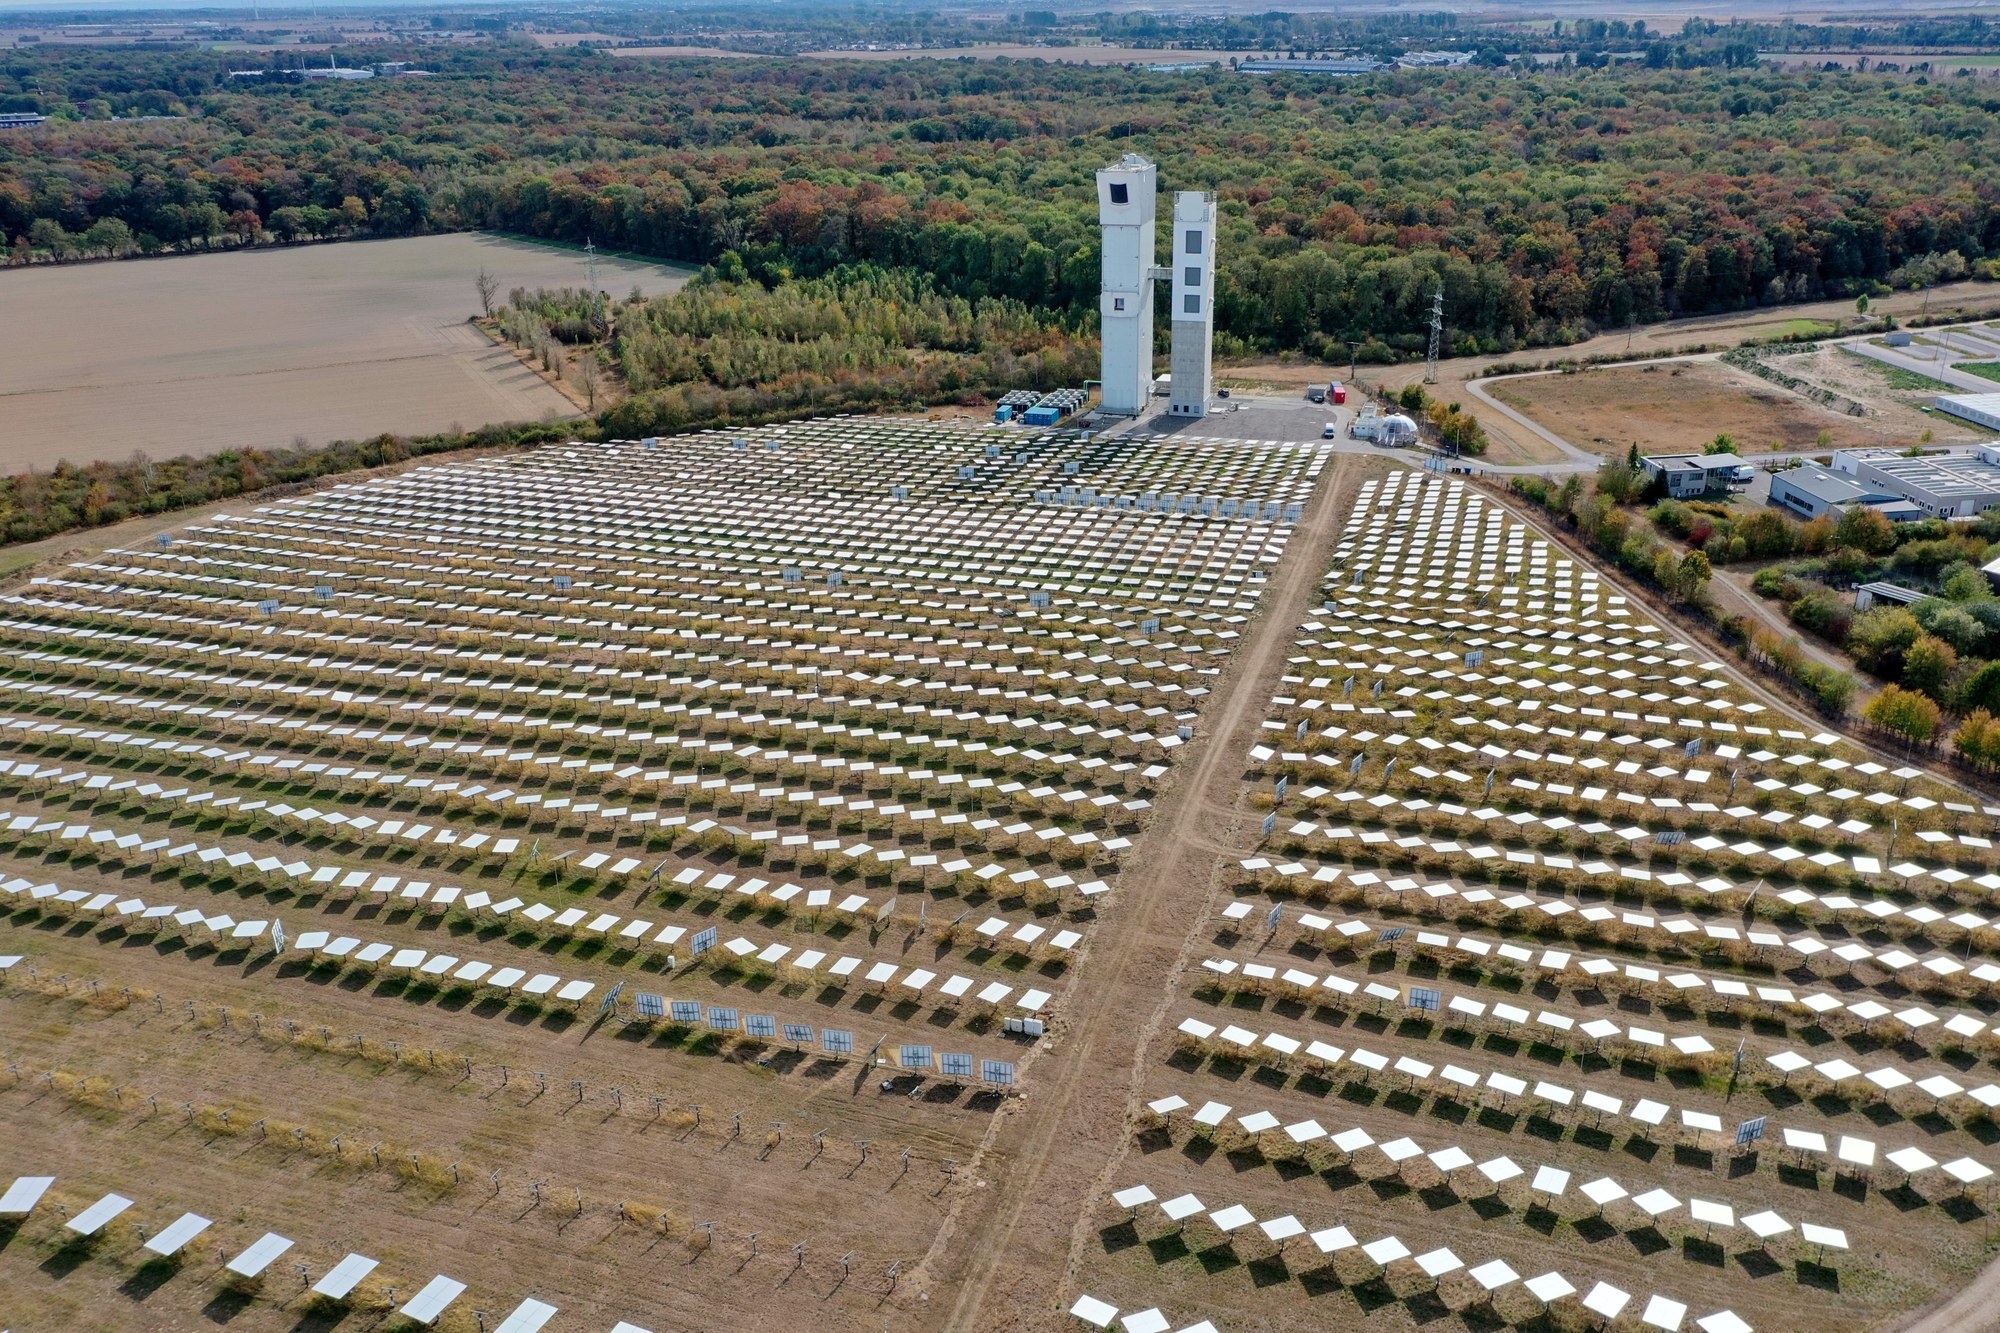 An aerial view of the Jülich solar towers with upstream heliostat field